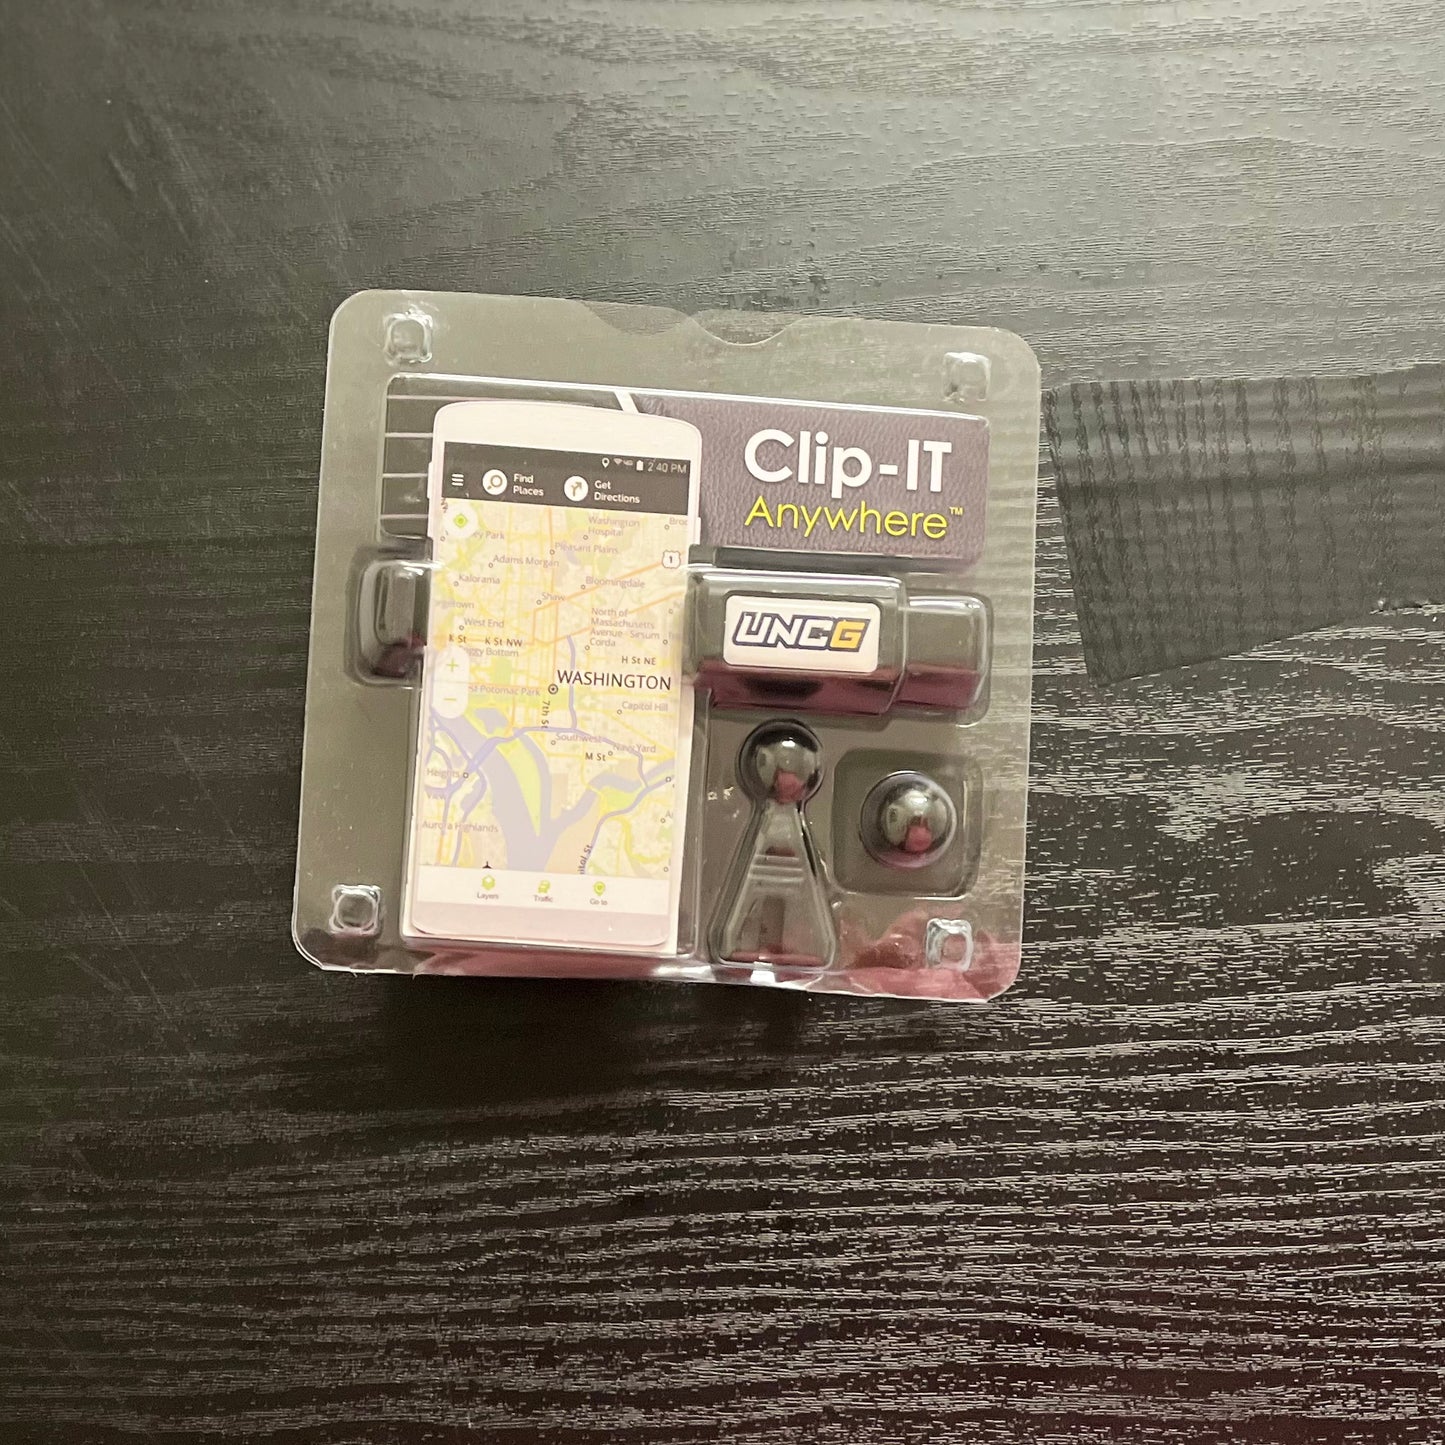 Cellphone Holder w/ UNCG logo  Mounts on car air vent or dashboard. "Clip-IT Anywhere"